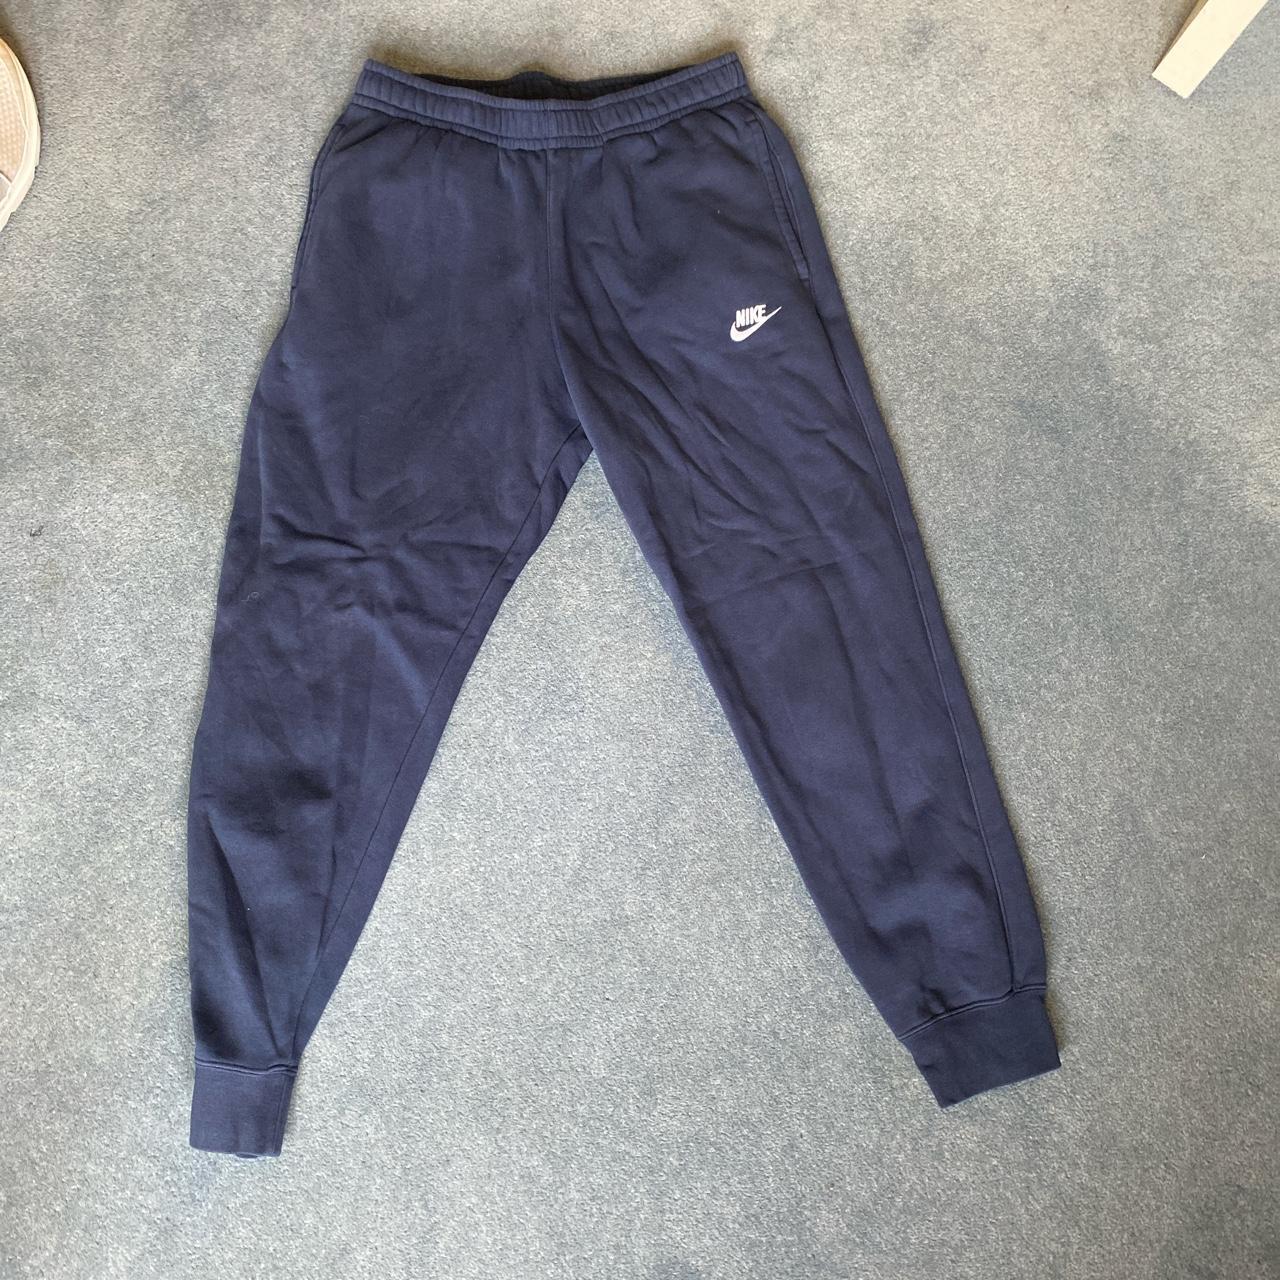 Nike Men's Navy and White Trousers | Depop